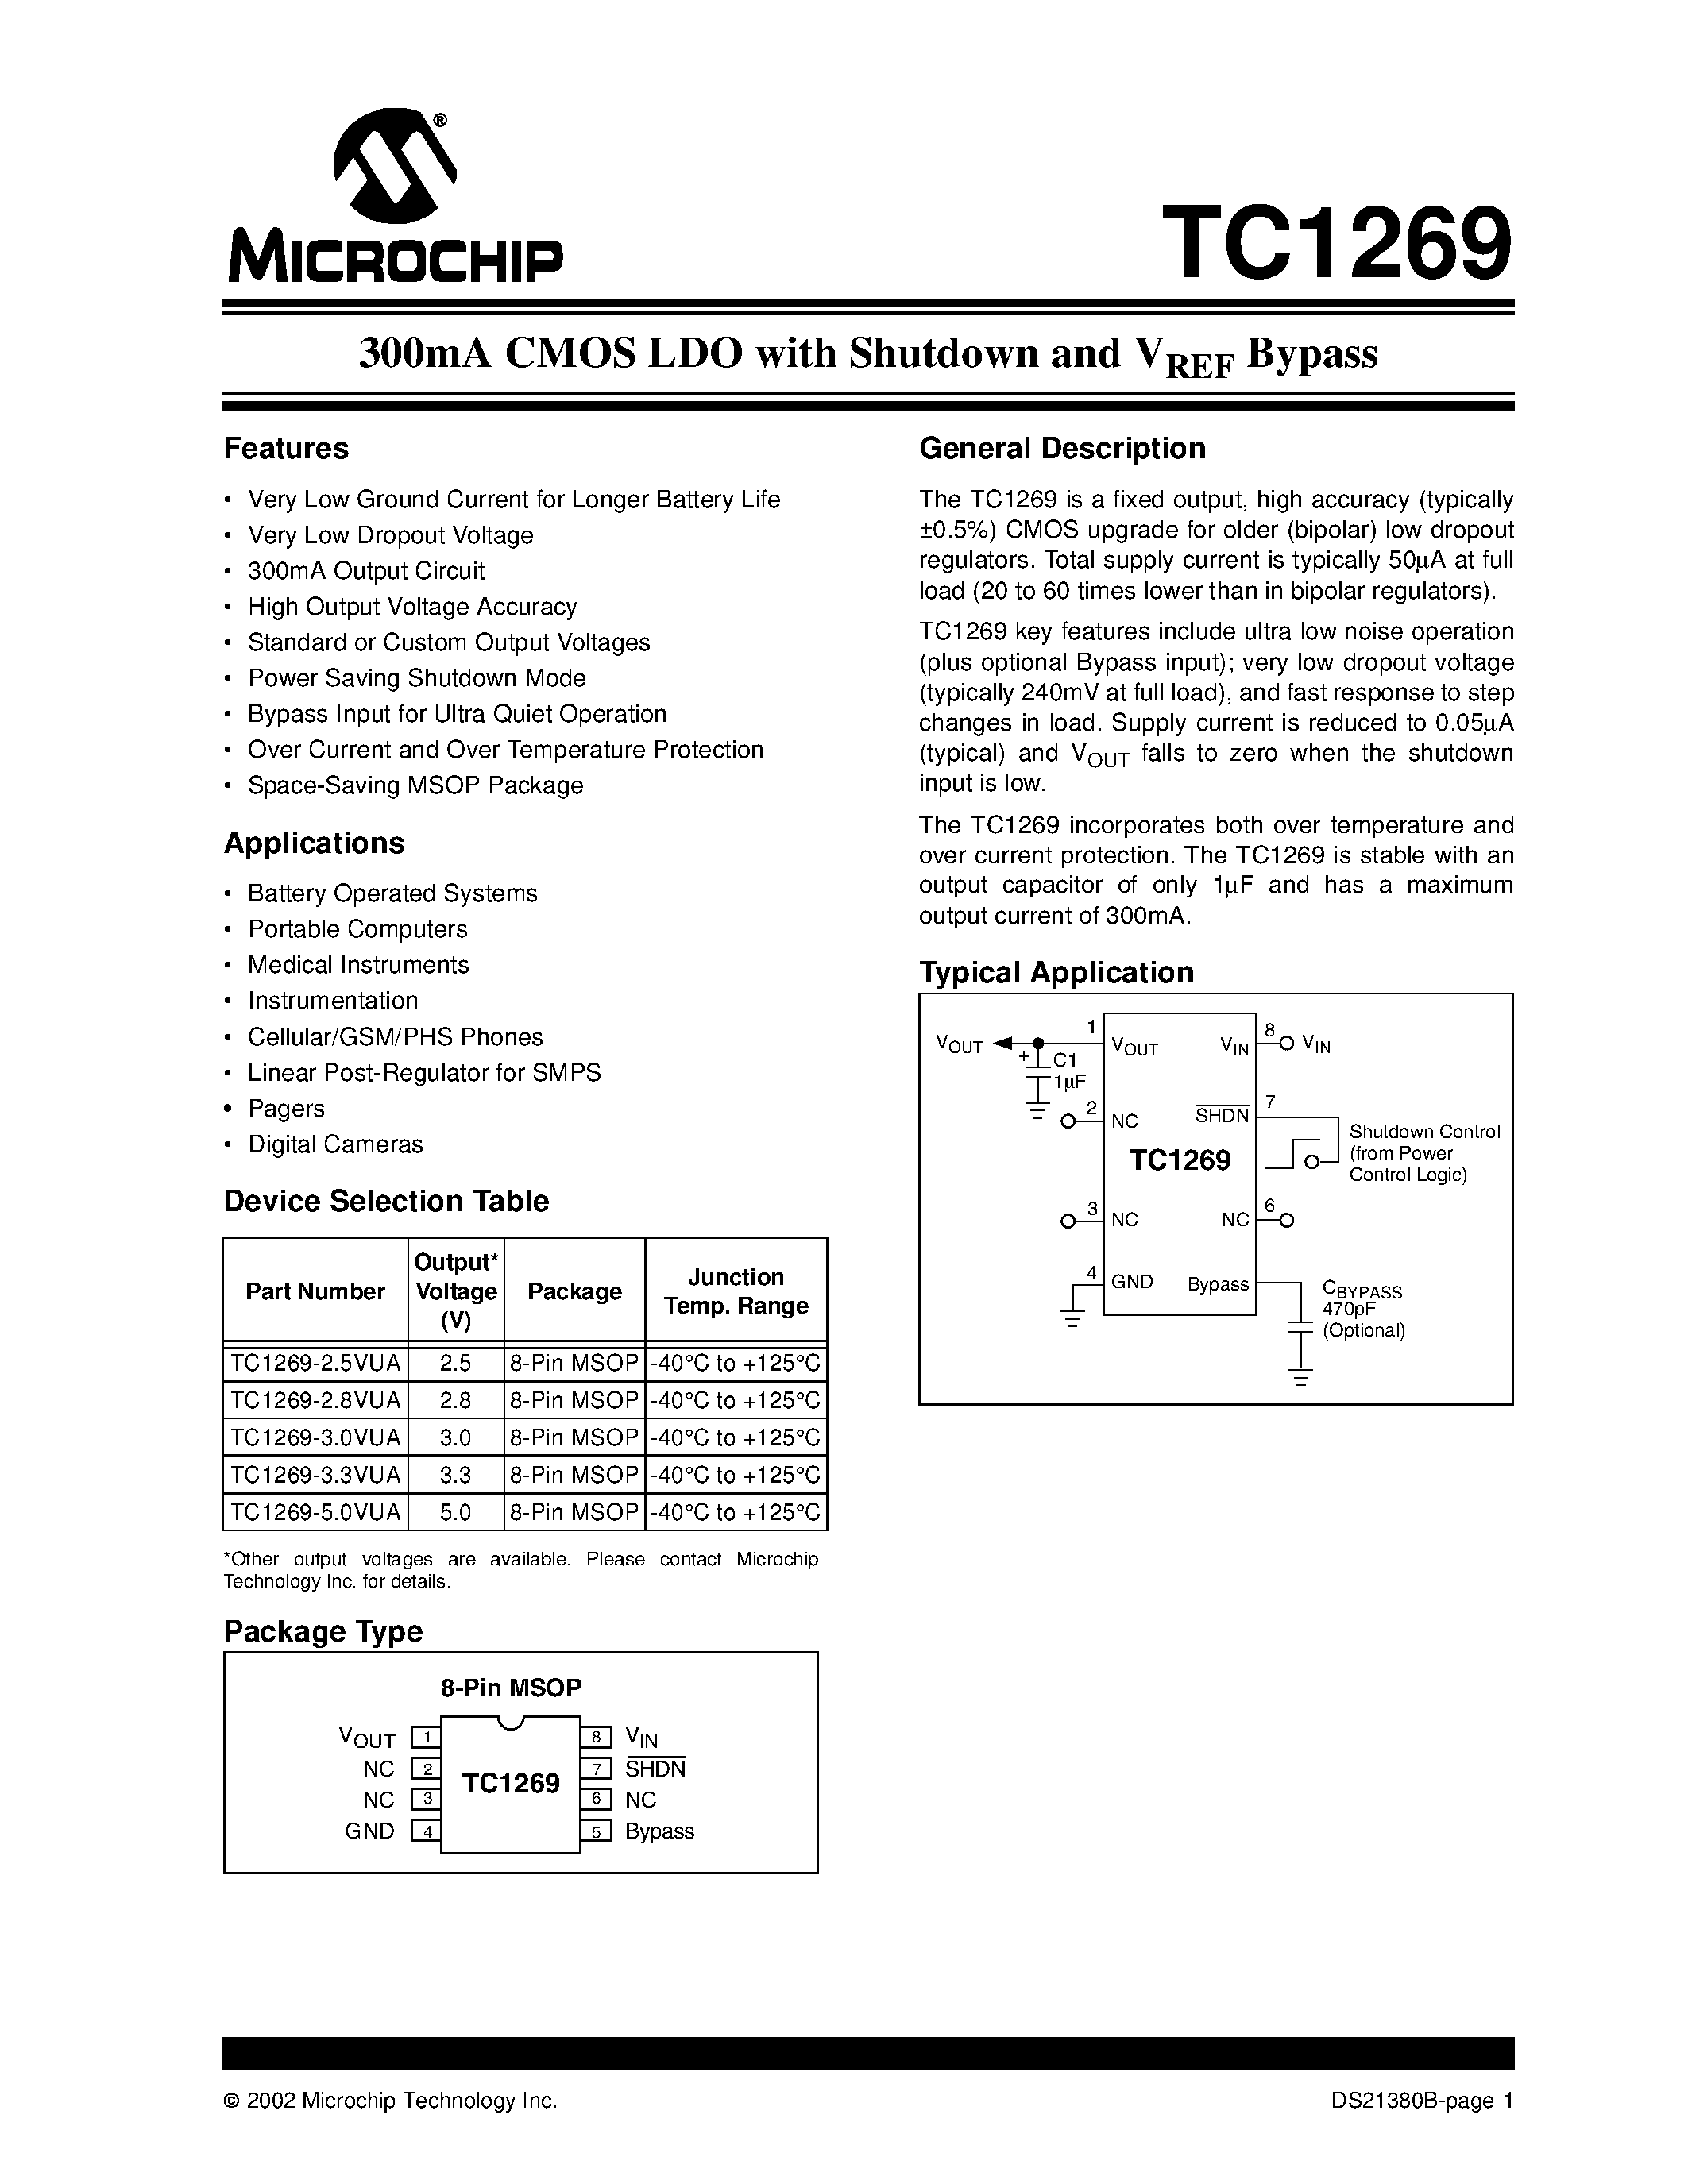 Datasheet TC1269 - 300mA CMOS LDO with Shutdown and VREF Bypass page 1